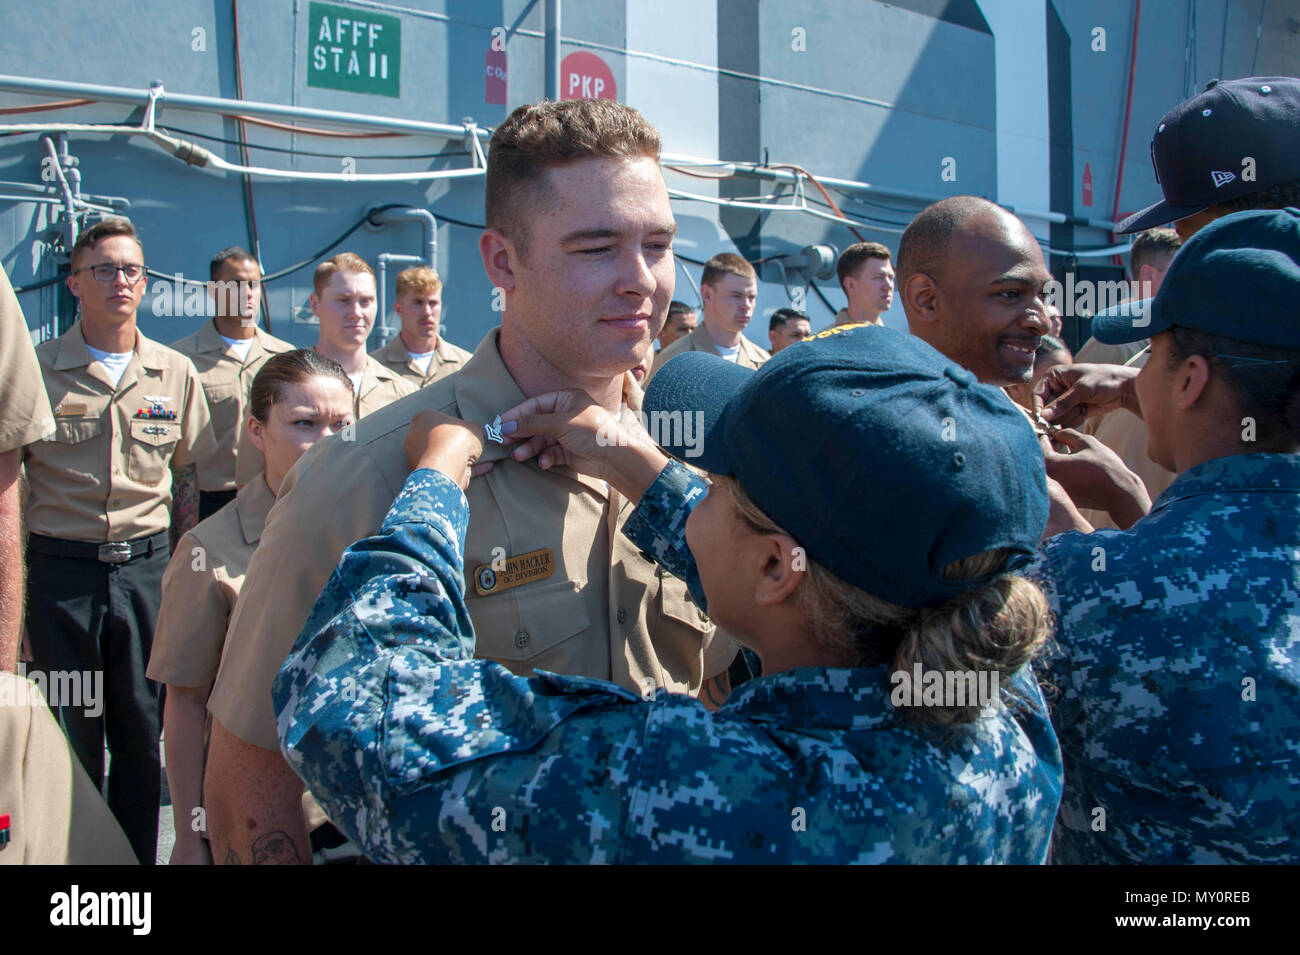 180601-N-ZS023-036 NAVAL BASE SAN DIEGO (June 1, 2018) A Sailor aboard the amphibious assault ship USS America (LAH 6) is frocked during a ceremony on the flight deck. America is moored at its homeport of Naval Base San Diego and is conducting a planned maintenance availability in preparation for the ship’s next tour of duty. (U.S. Navy photo by Mass Communication Specialist 3rd Class Vance Hand/Released) Stock Photo